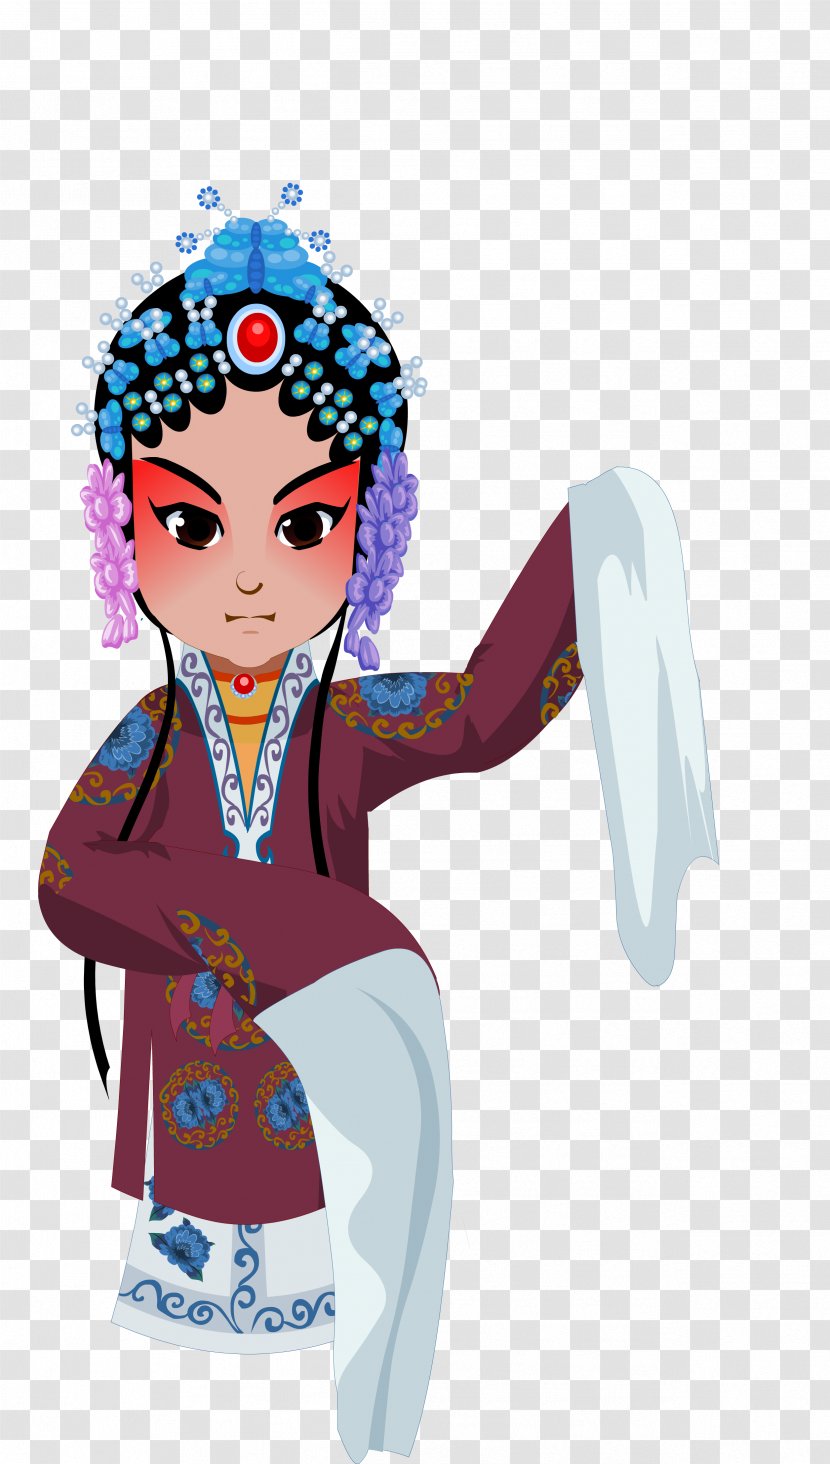 Illustration Cartoon Clothing Accessories Character Fashion - Chineseopera Flyer Transparent PNG